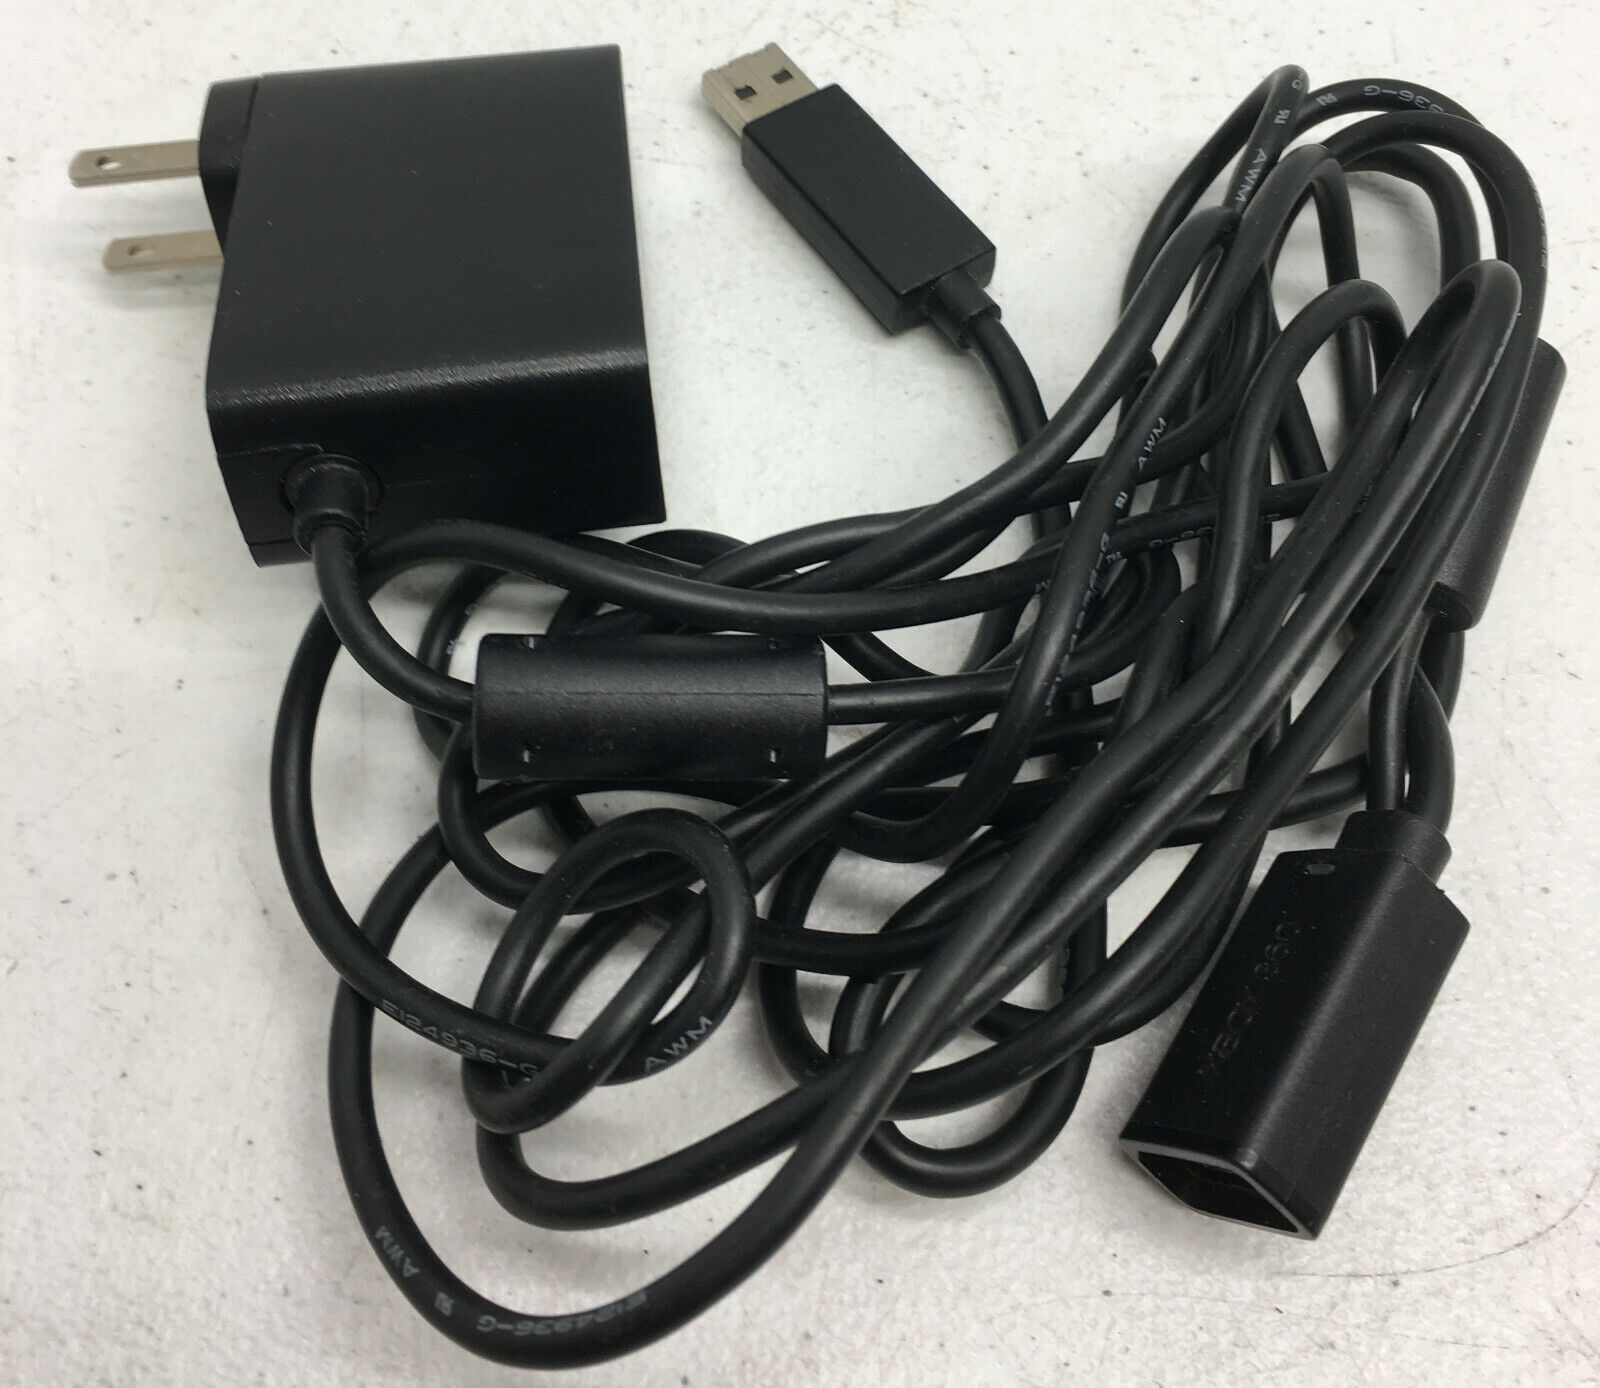 OEM Microsoft Xbox 360 Kinect 5% OFF Model Many popular brands Adapter X854 Charger AC 1429